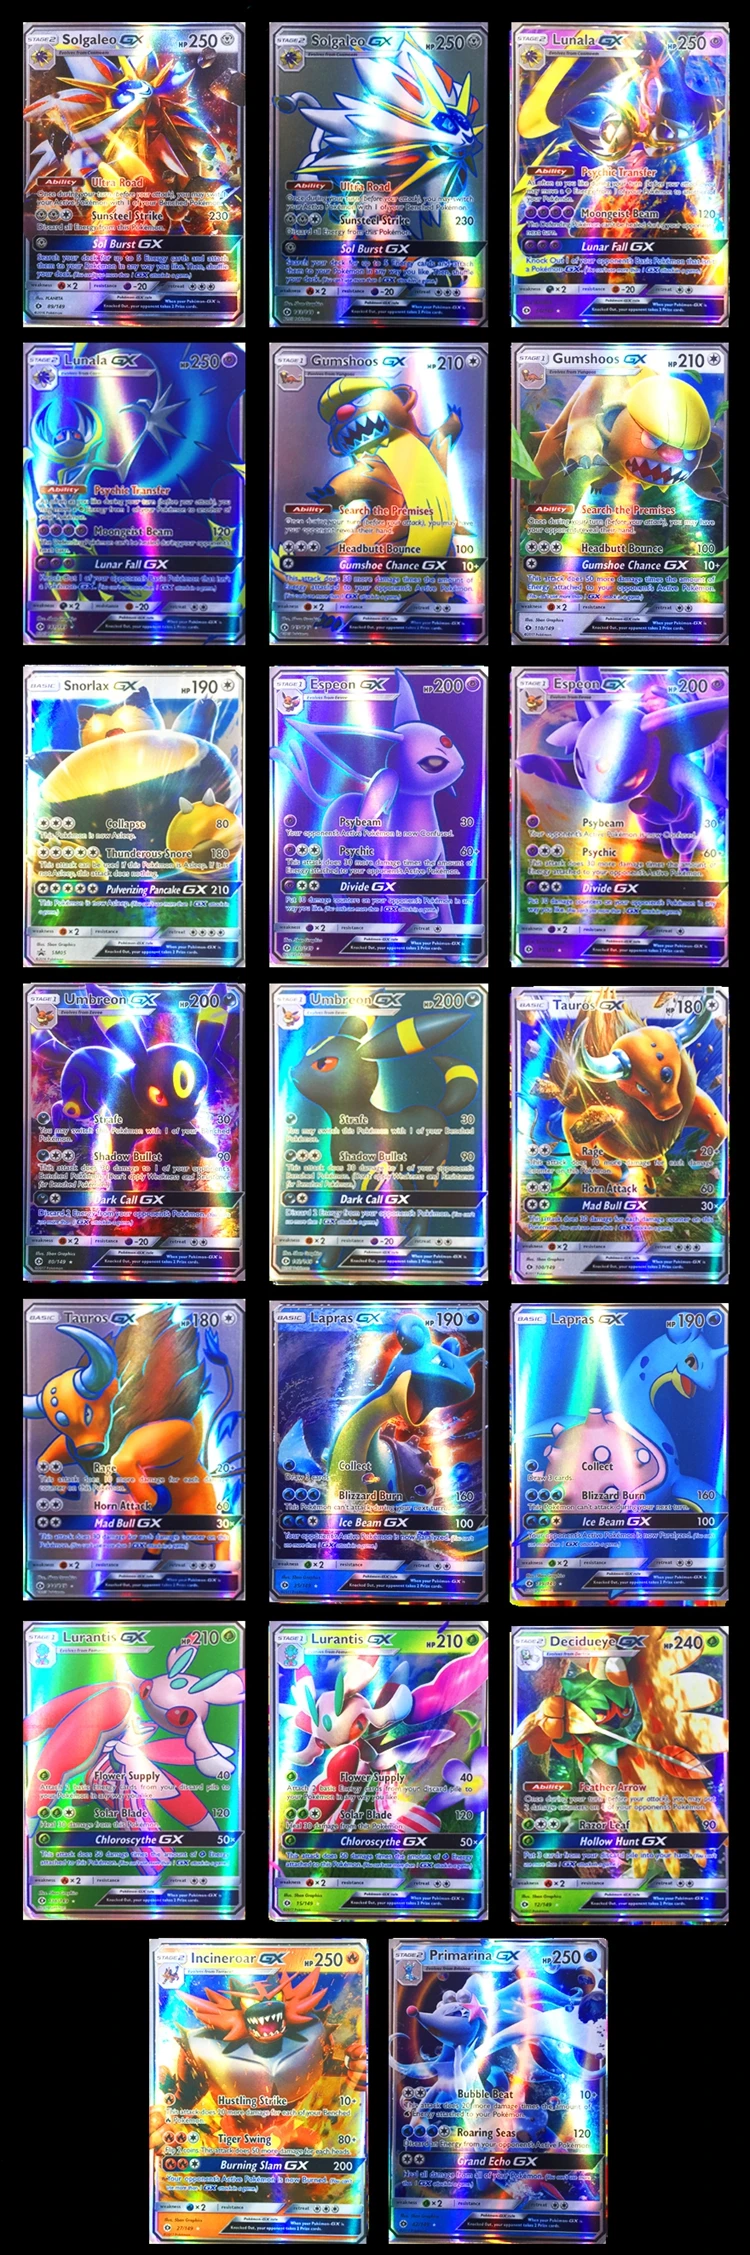 pokemon trading card game online play now